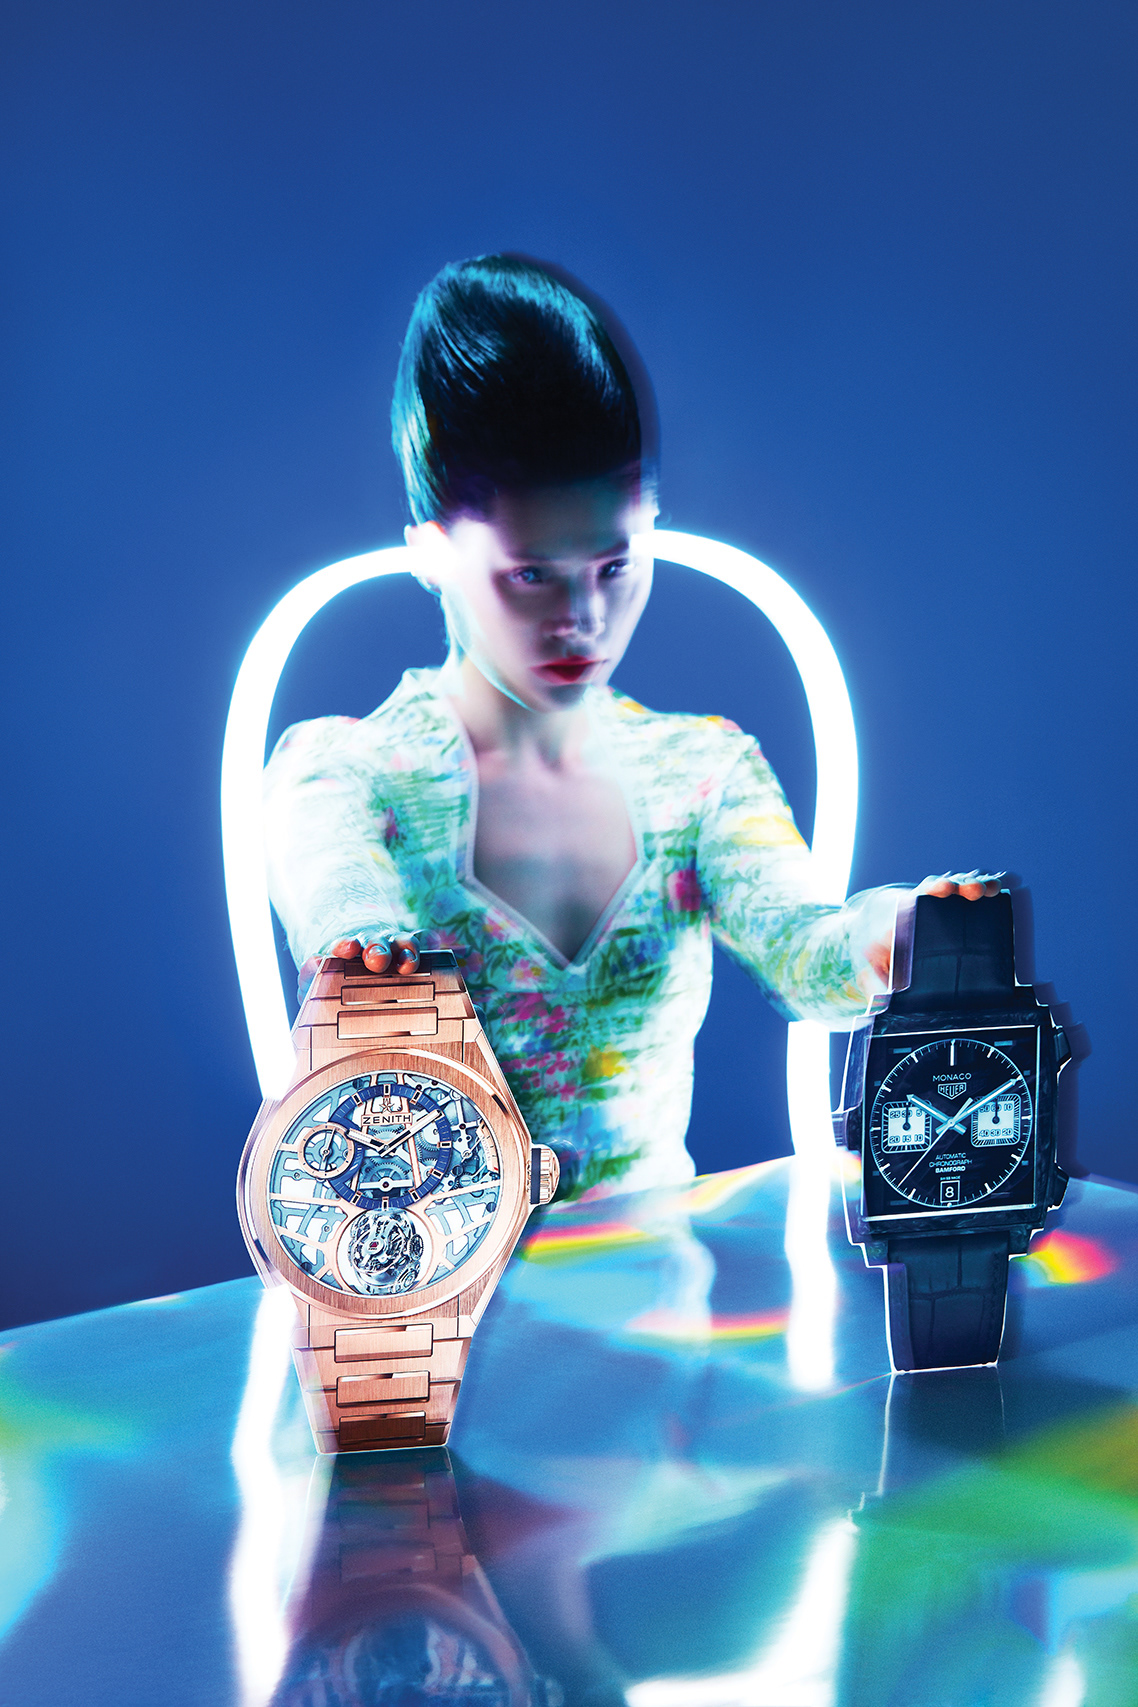 magazine product watch Fashion  shanghai light model time Photography  color